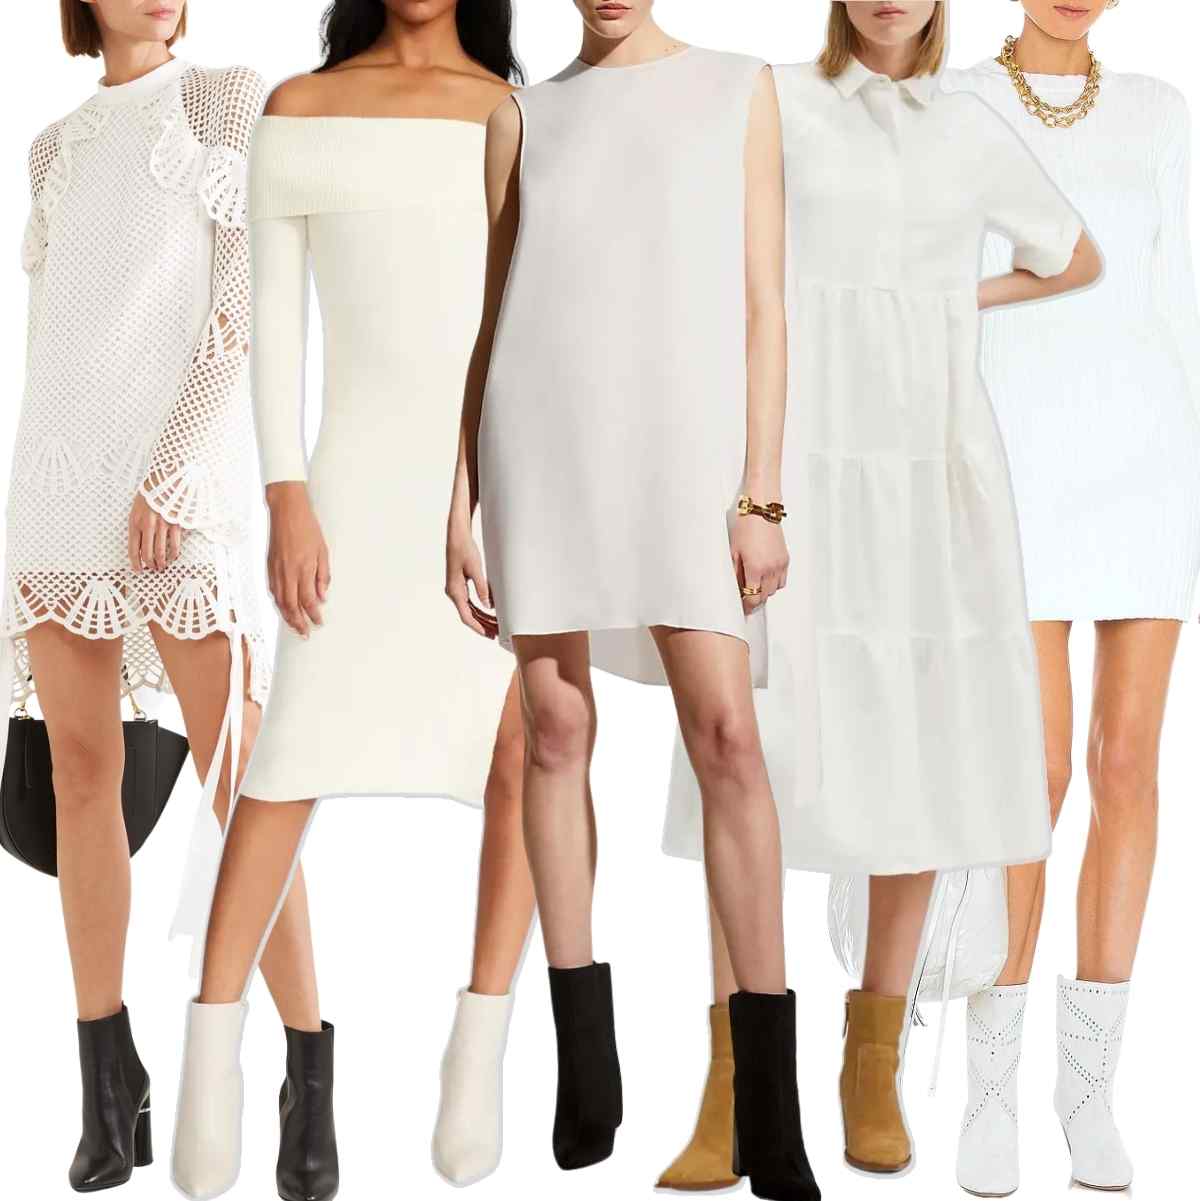 Collage of 5 women wearing different white dresses with ankle boots.